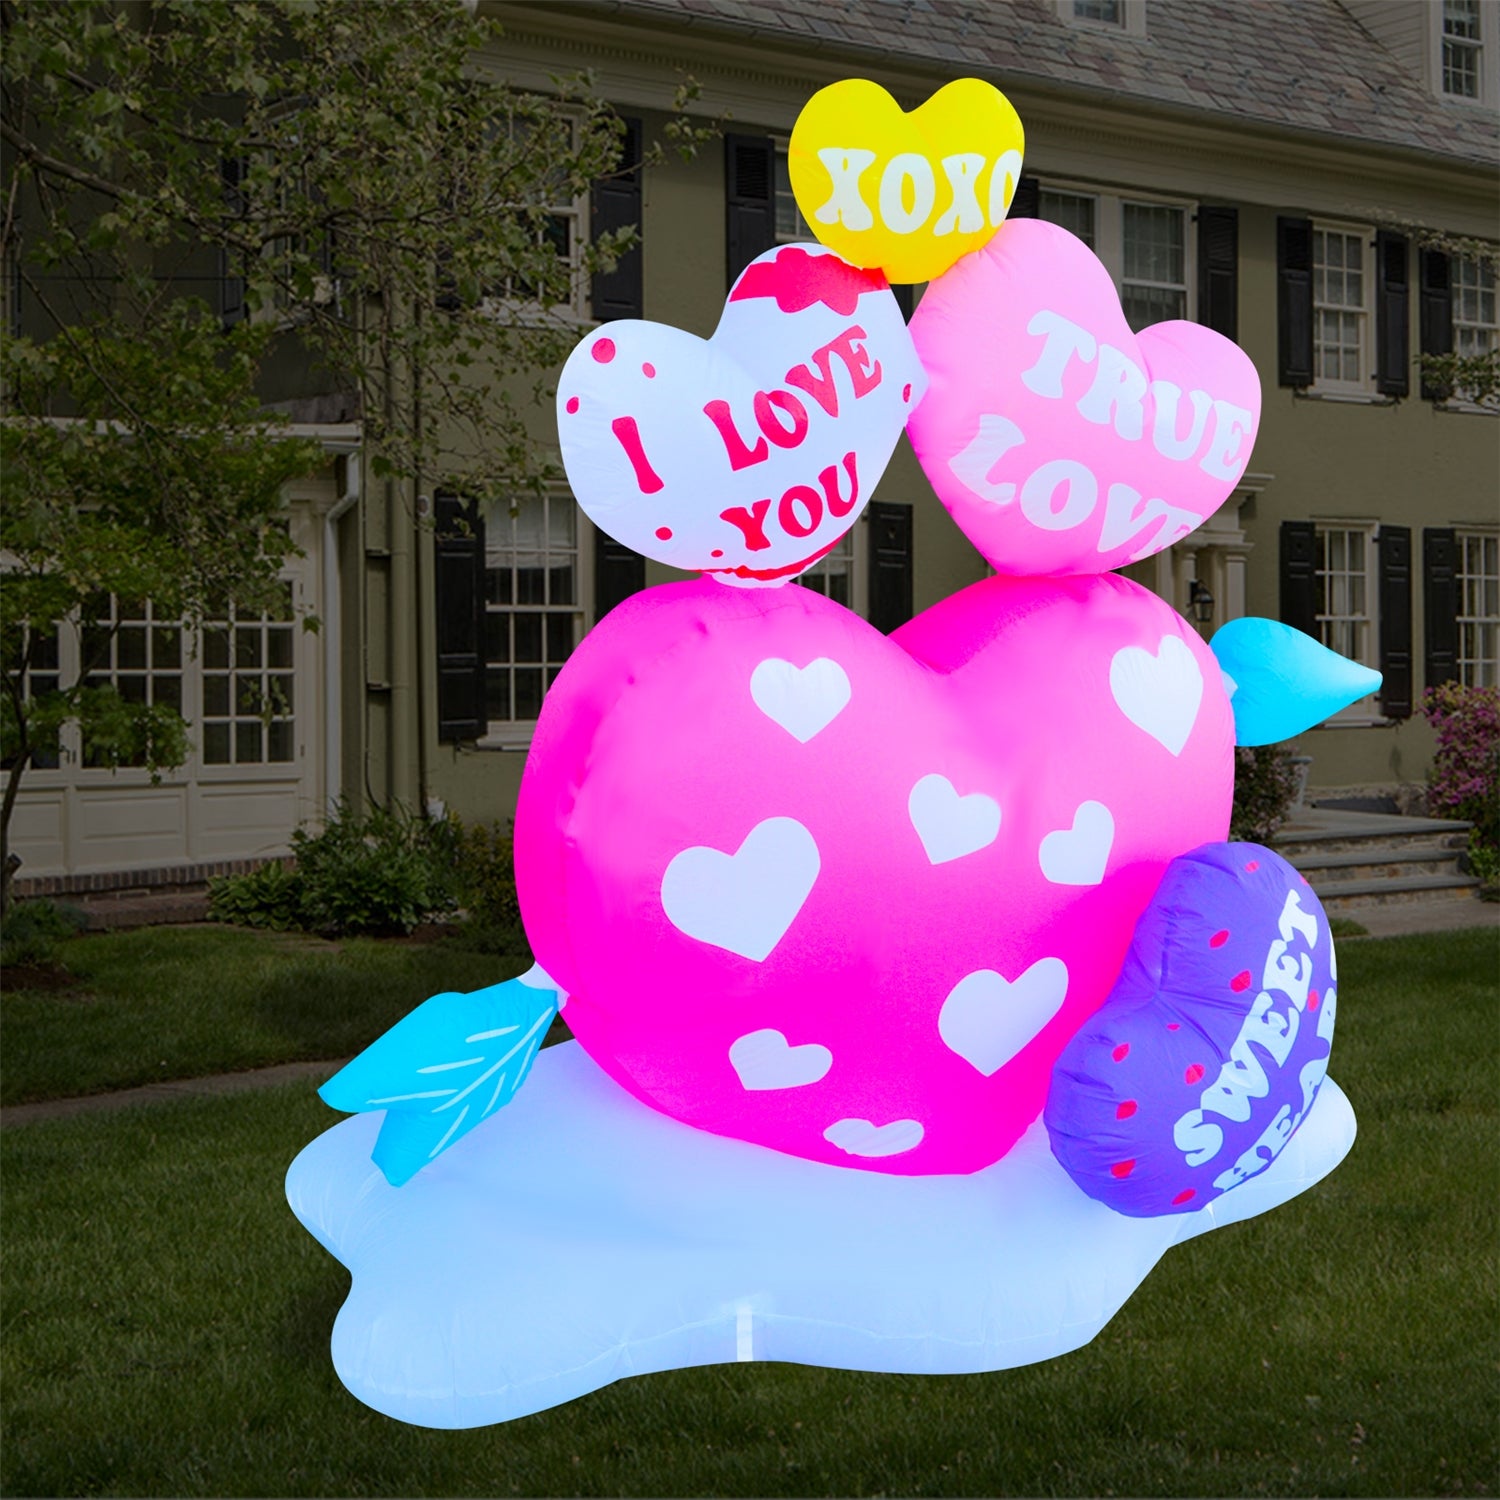 6Ft SeasonBlow Inflatable Valentine's Day Heart.